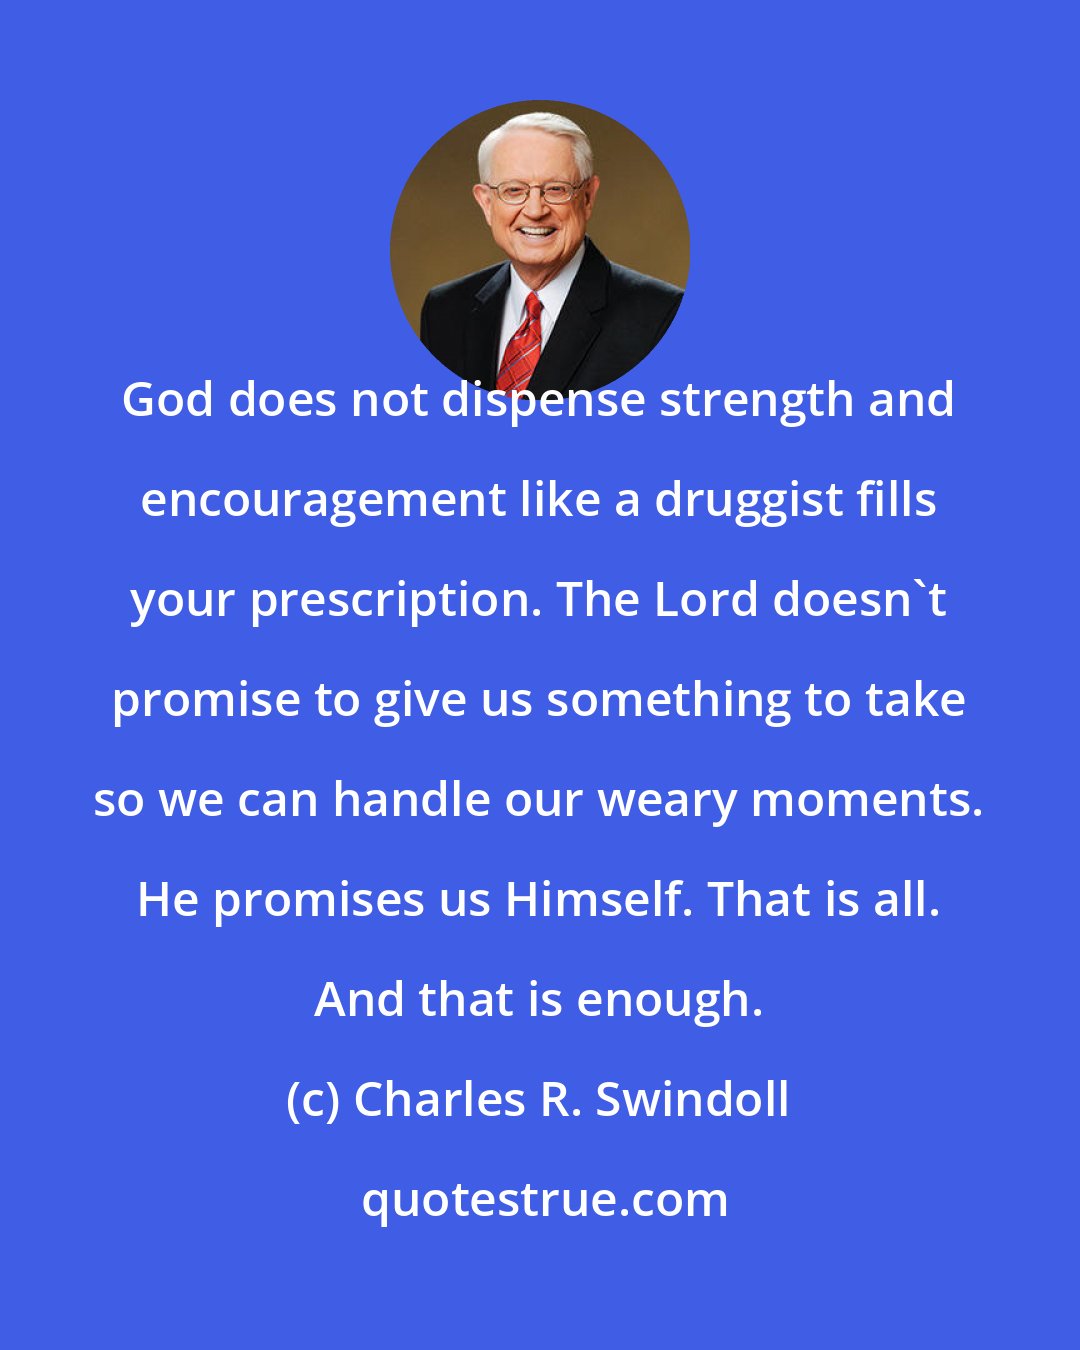 Charles R. Swindoll: God does not dispense strength and encouragement like a druggist fills your prescription. The Lord doesn't promise to give us something to take so we can handle our weary moments. He promises us Himself. That is all. And that is enough.